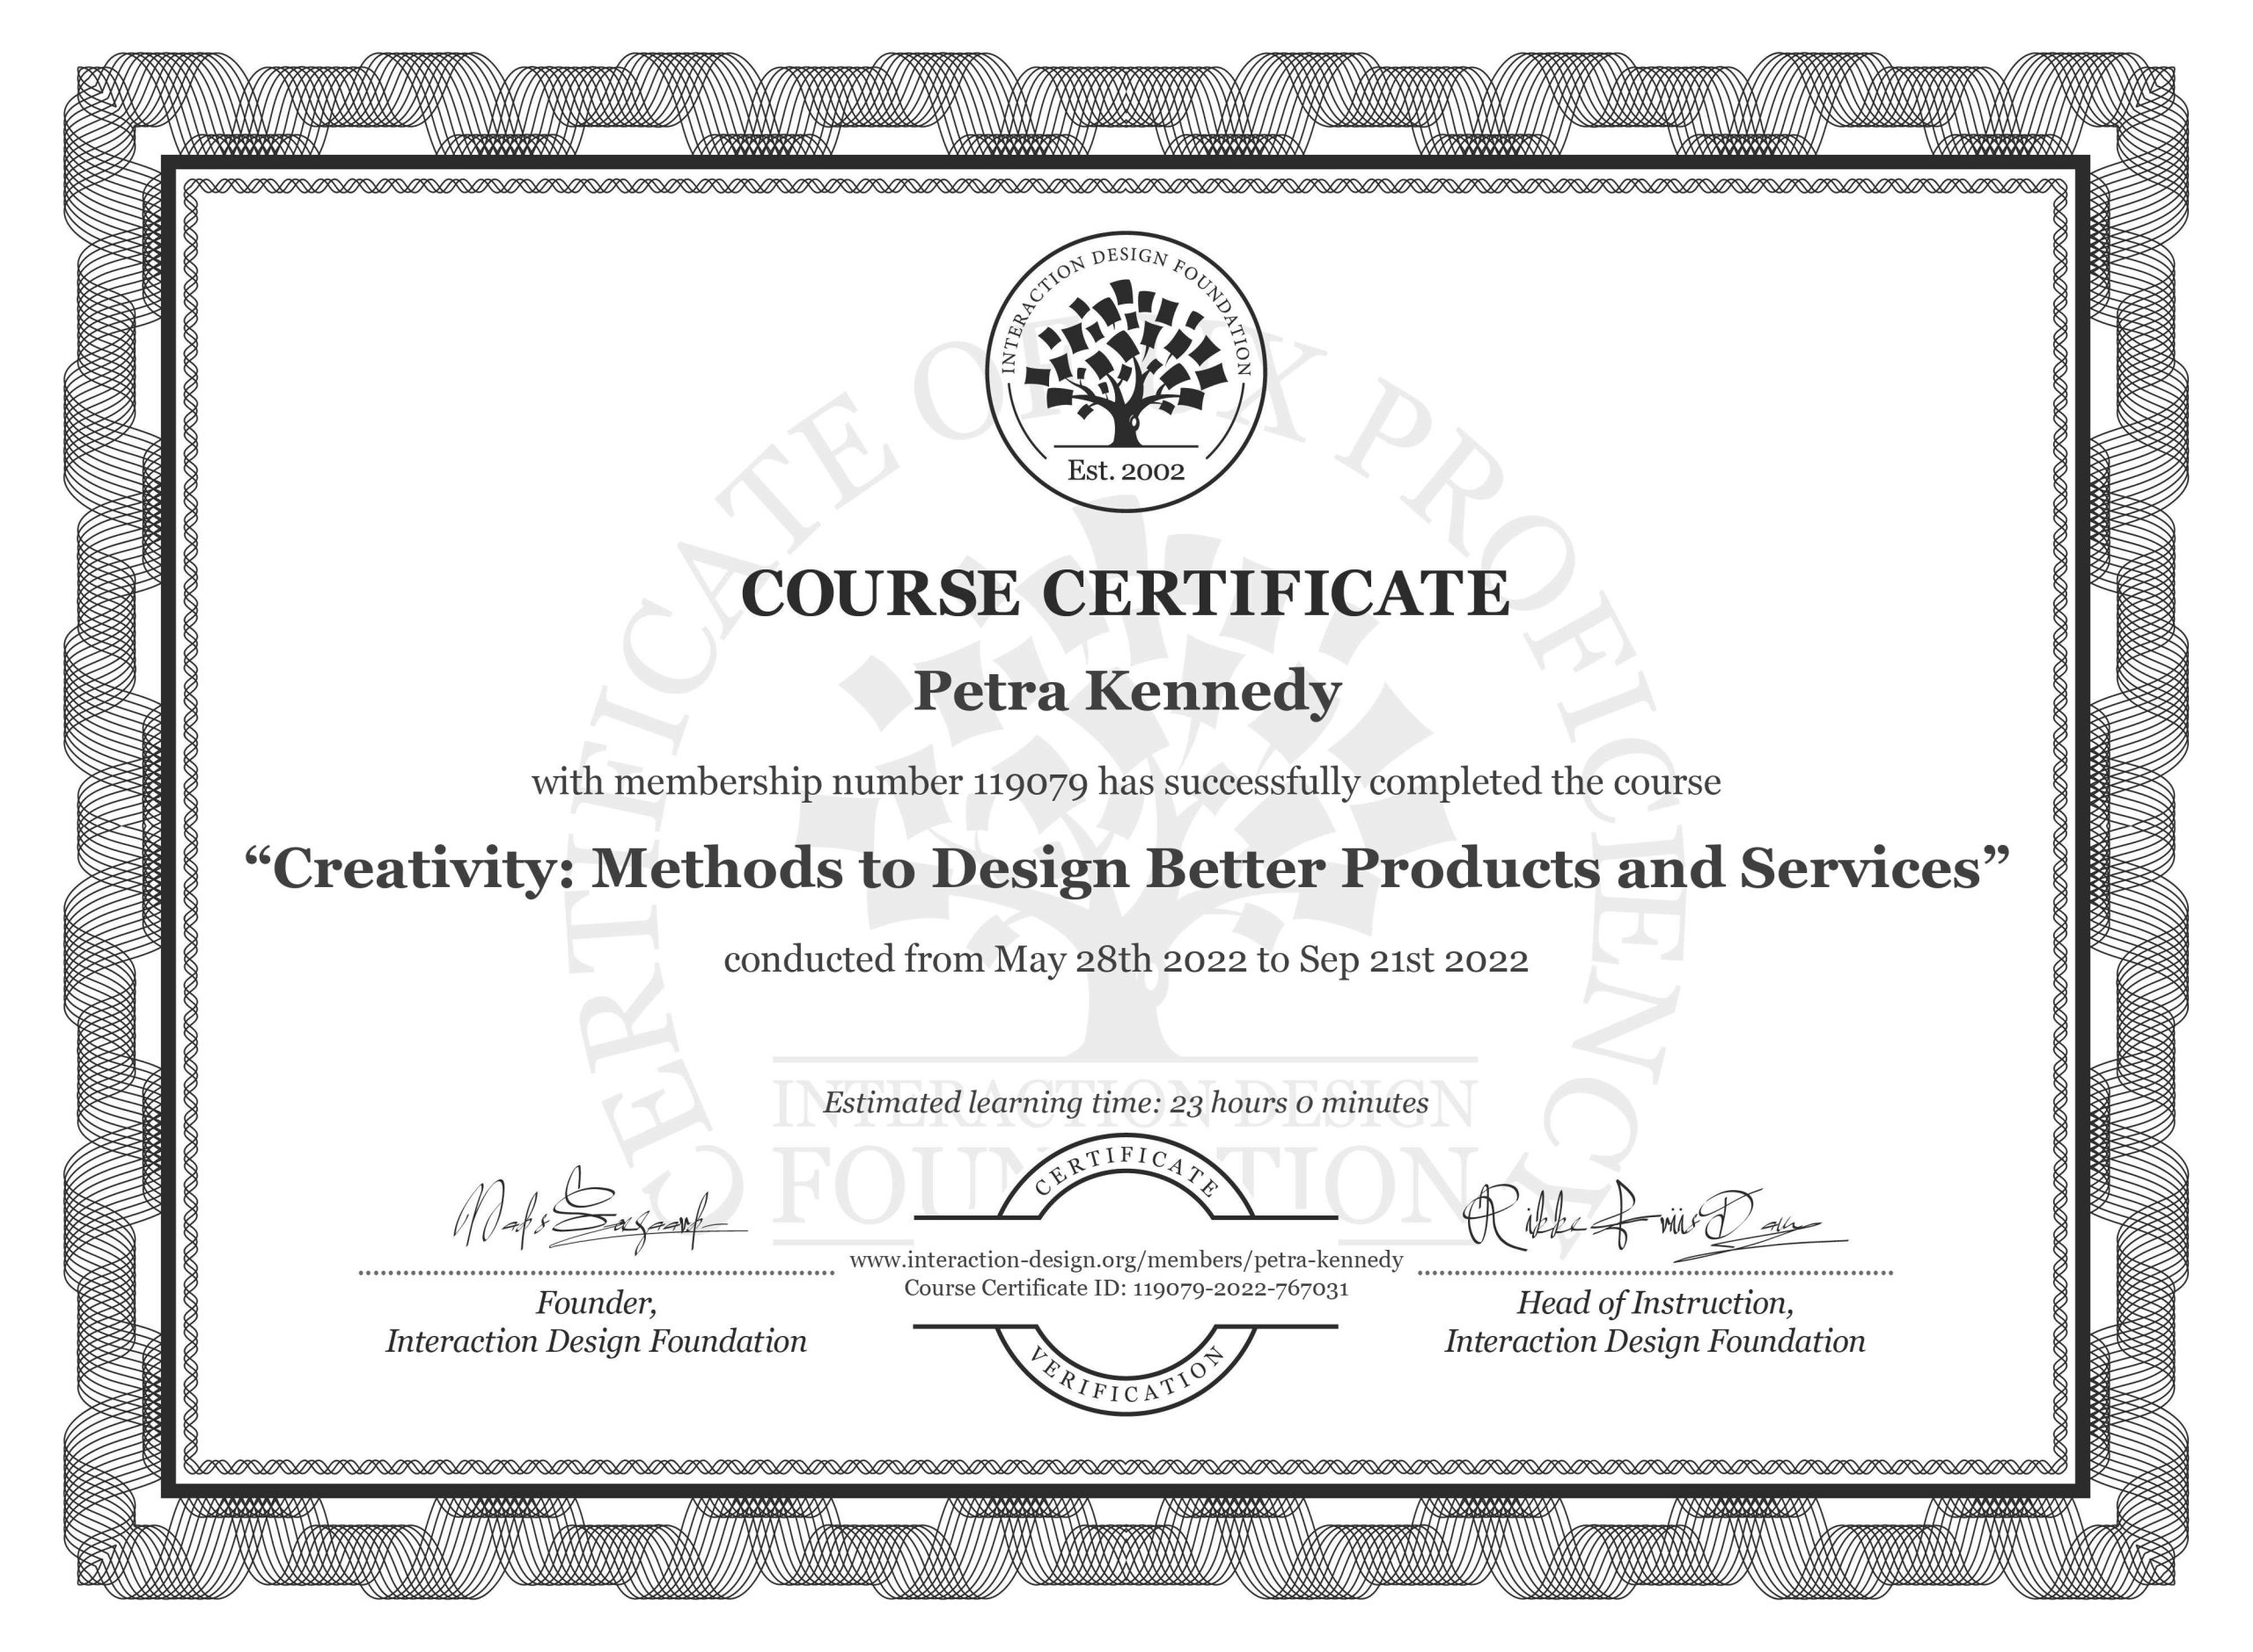 IxDF course certificate Creativity methods to design better products and services